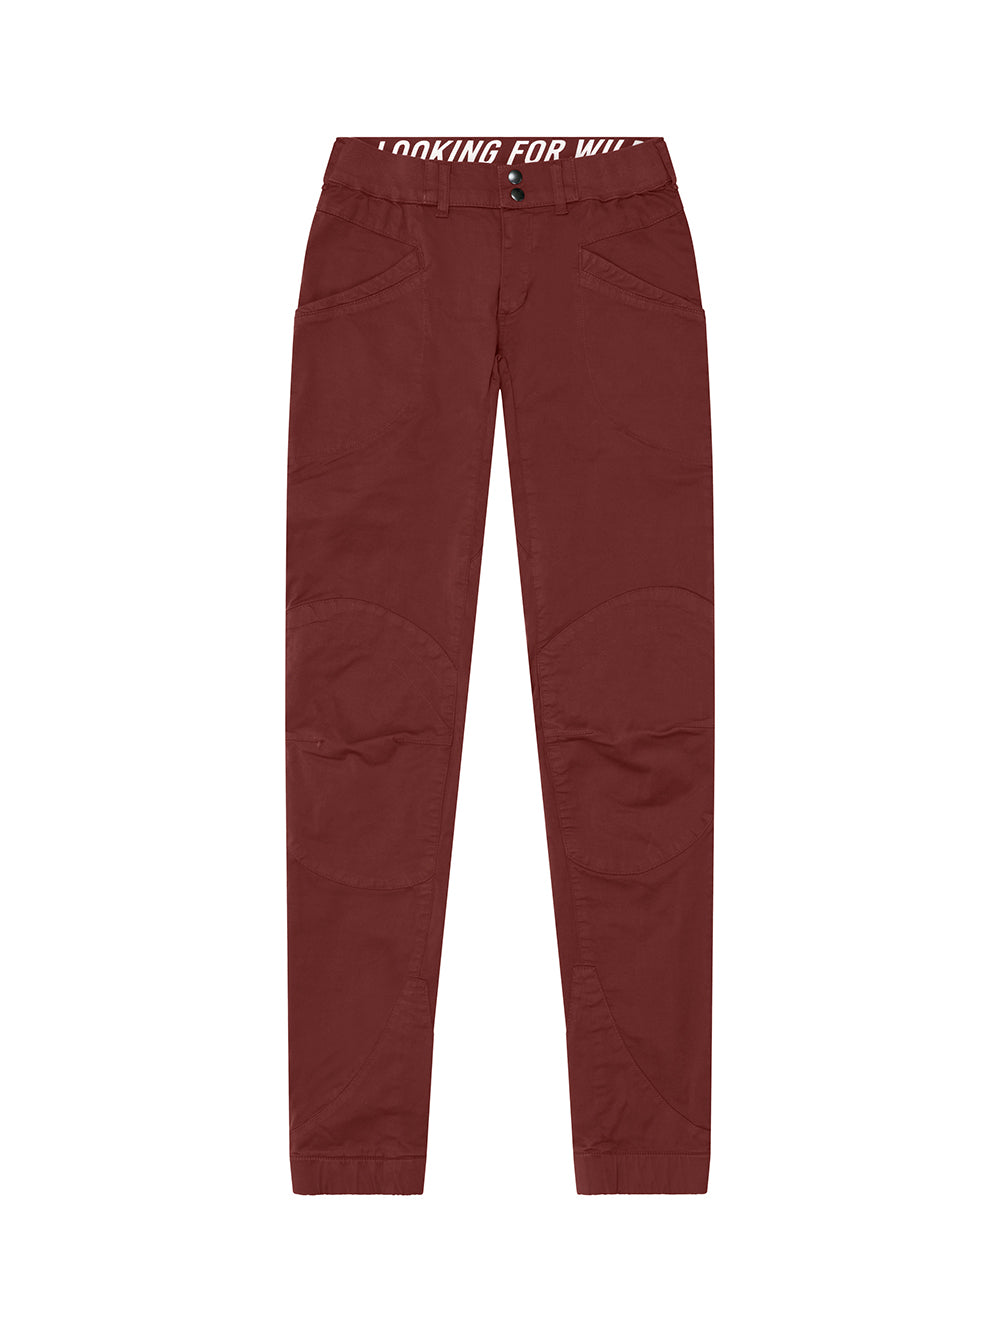 Technical Trousers Laila Peak MADDER BROWN